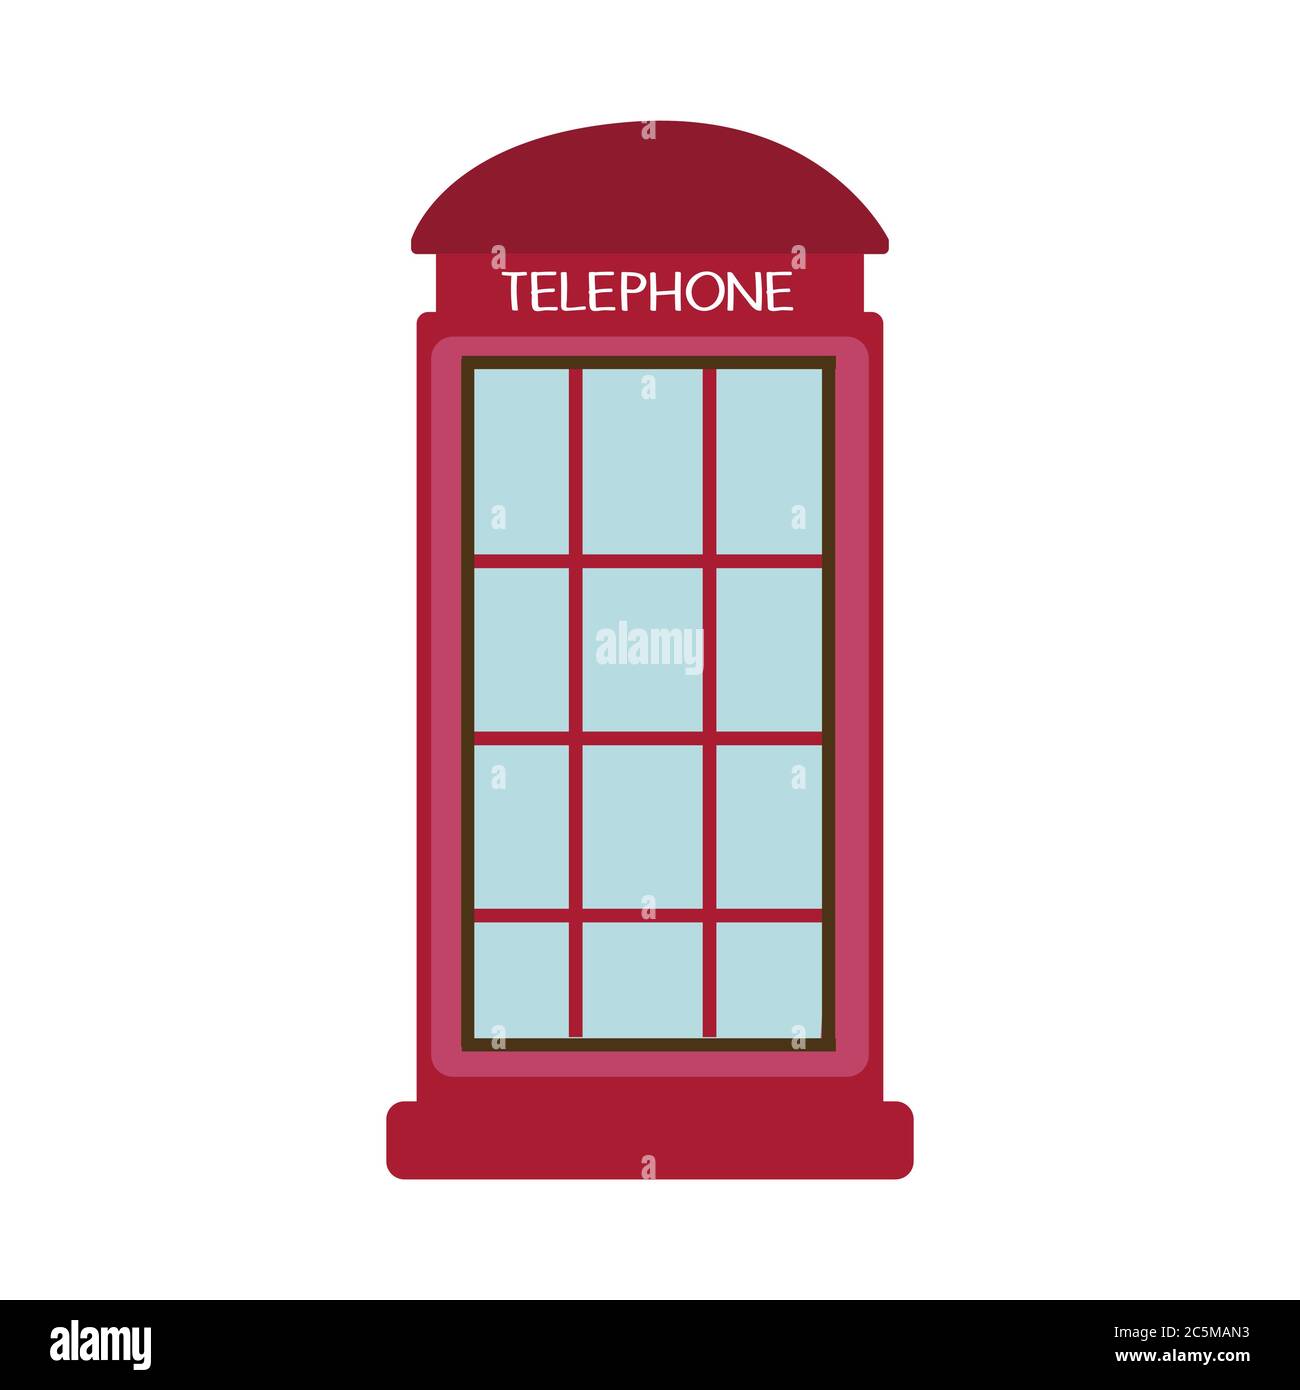 London phone booth on white background. Vector illustration in trendy flat style. EPS 10. Stock Vector